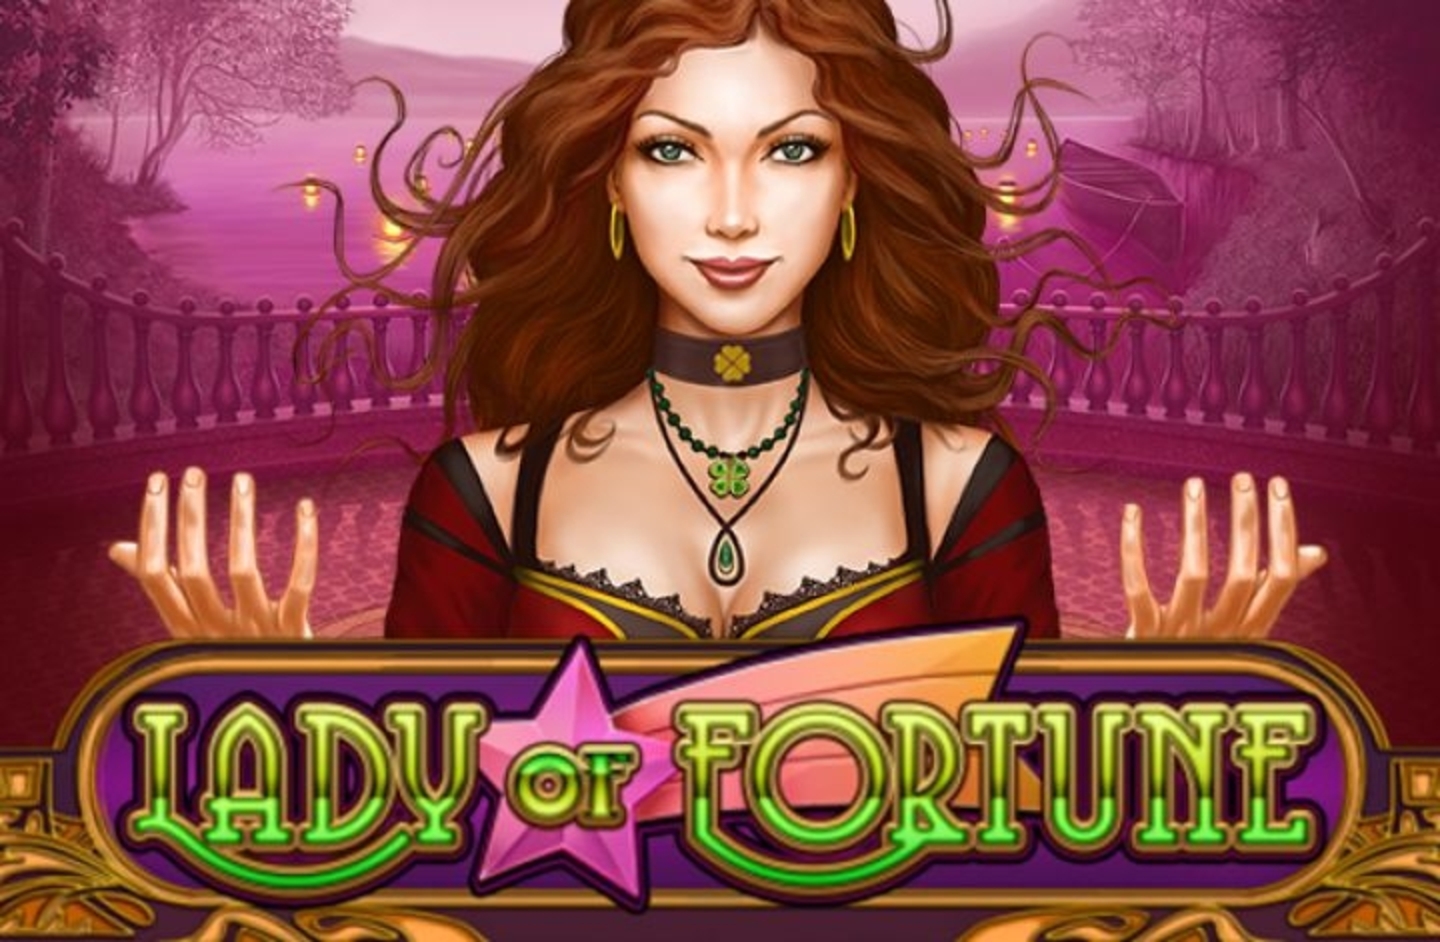 Lady of Fortune demo